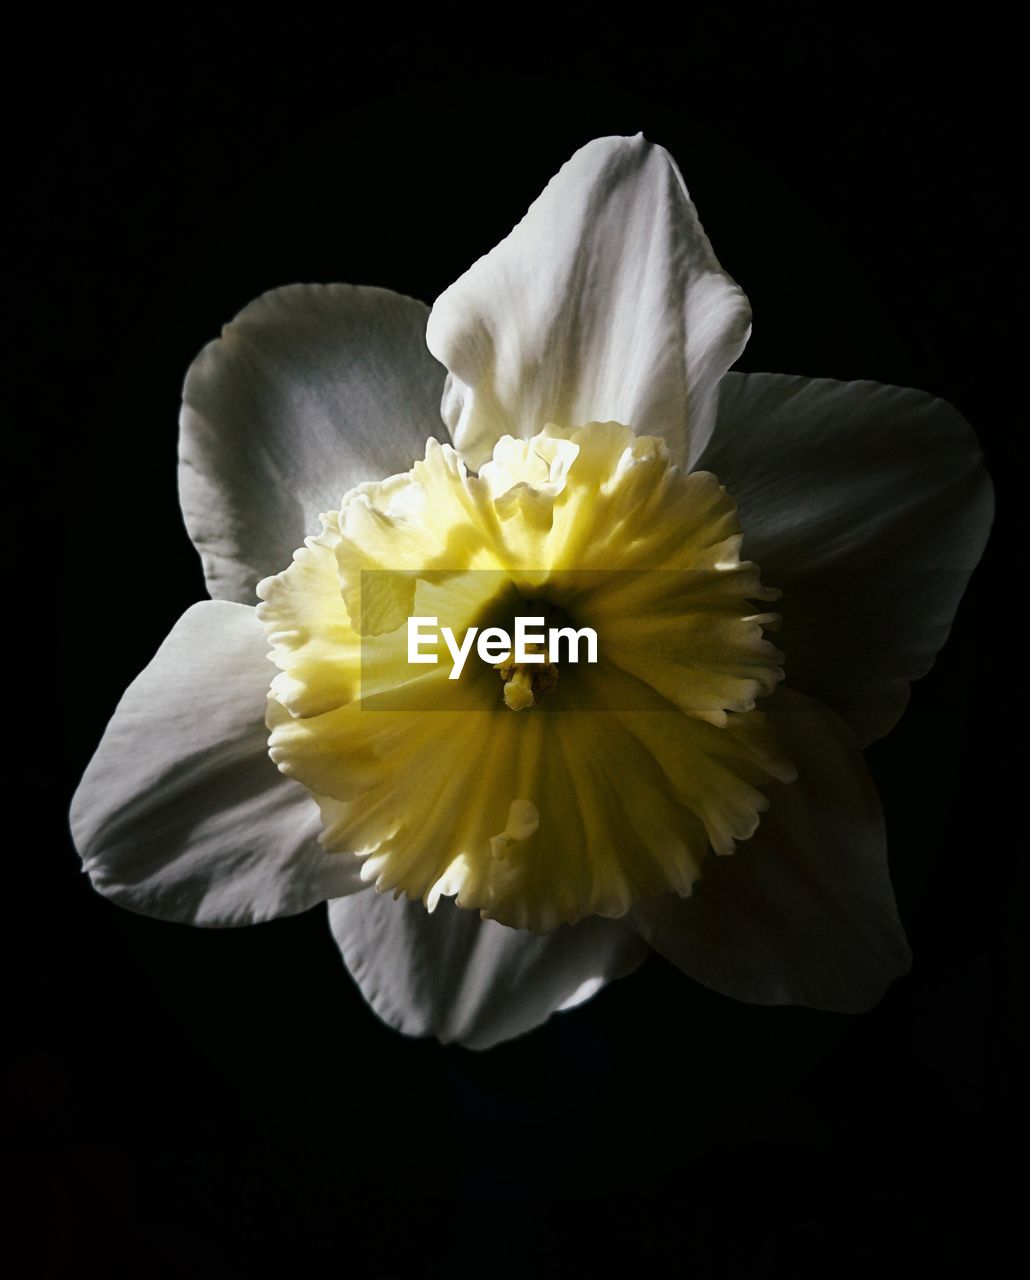 CLOSE-UP OF WHITE YELLOW FLOWER AGAINST BLACK BACKGROUND